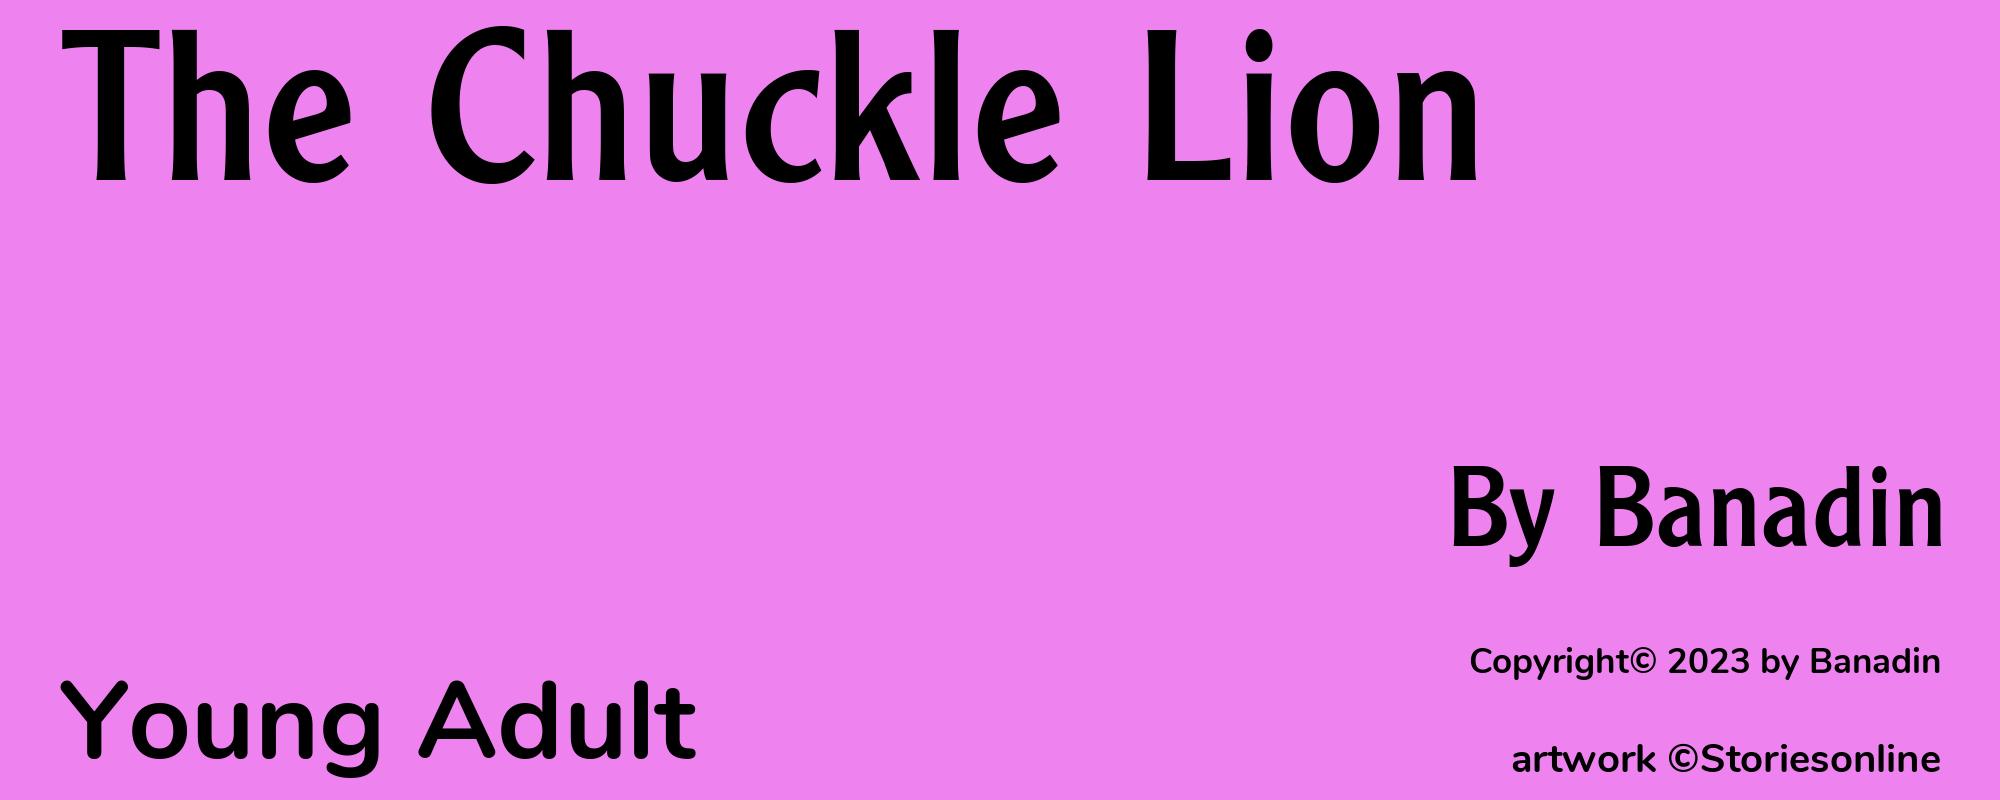 The Chuckle Lion - Cover